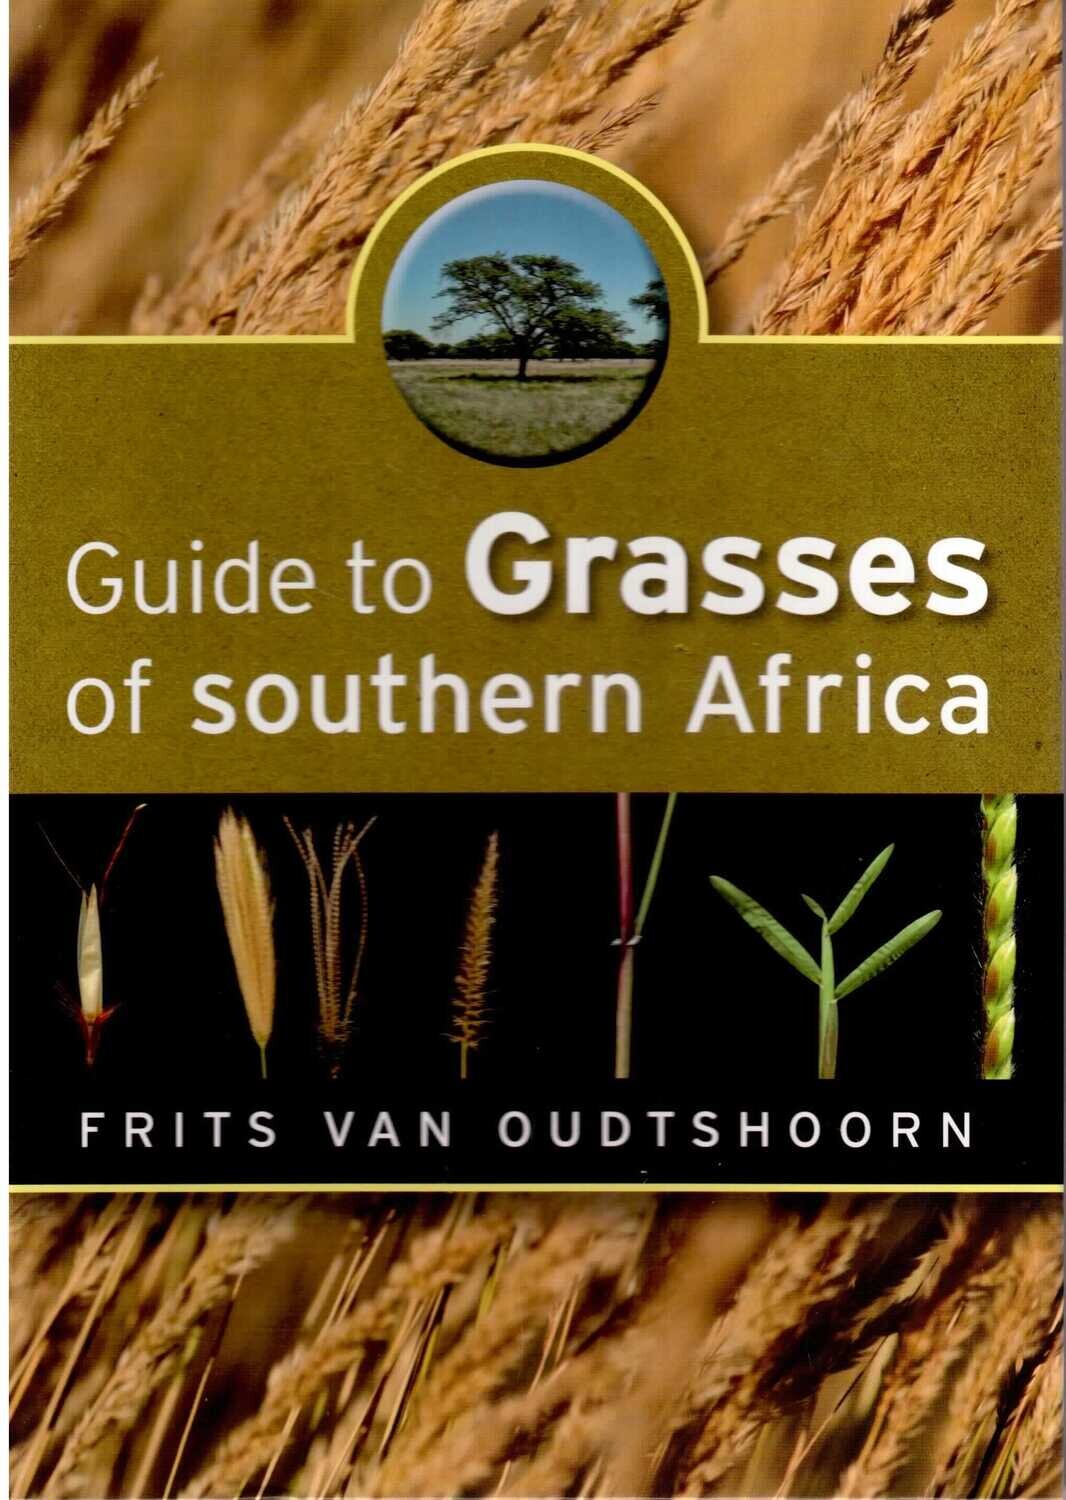 Guide to Grasses